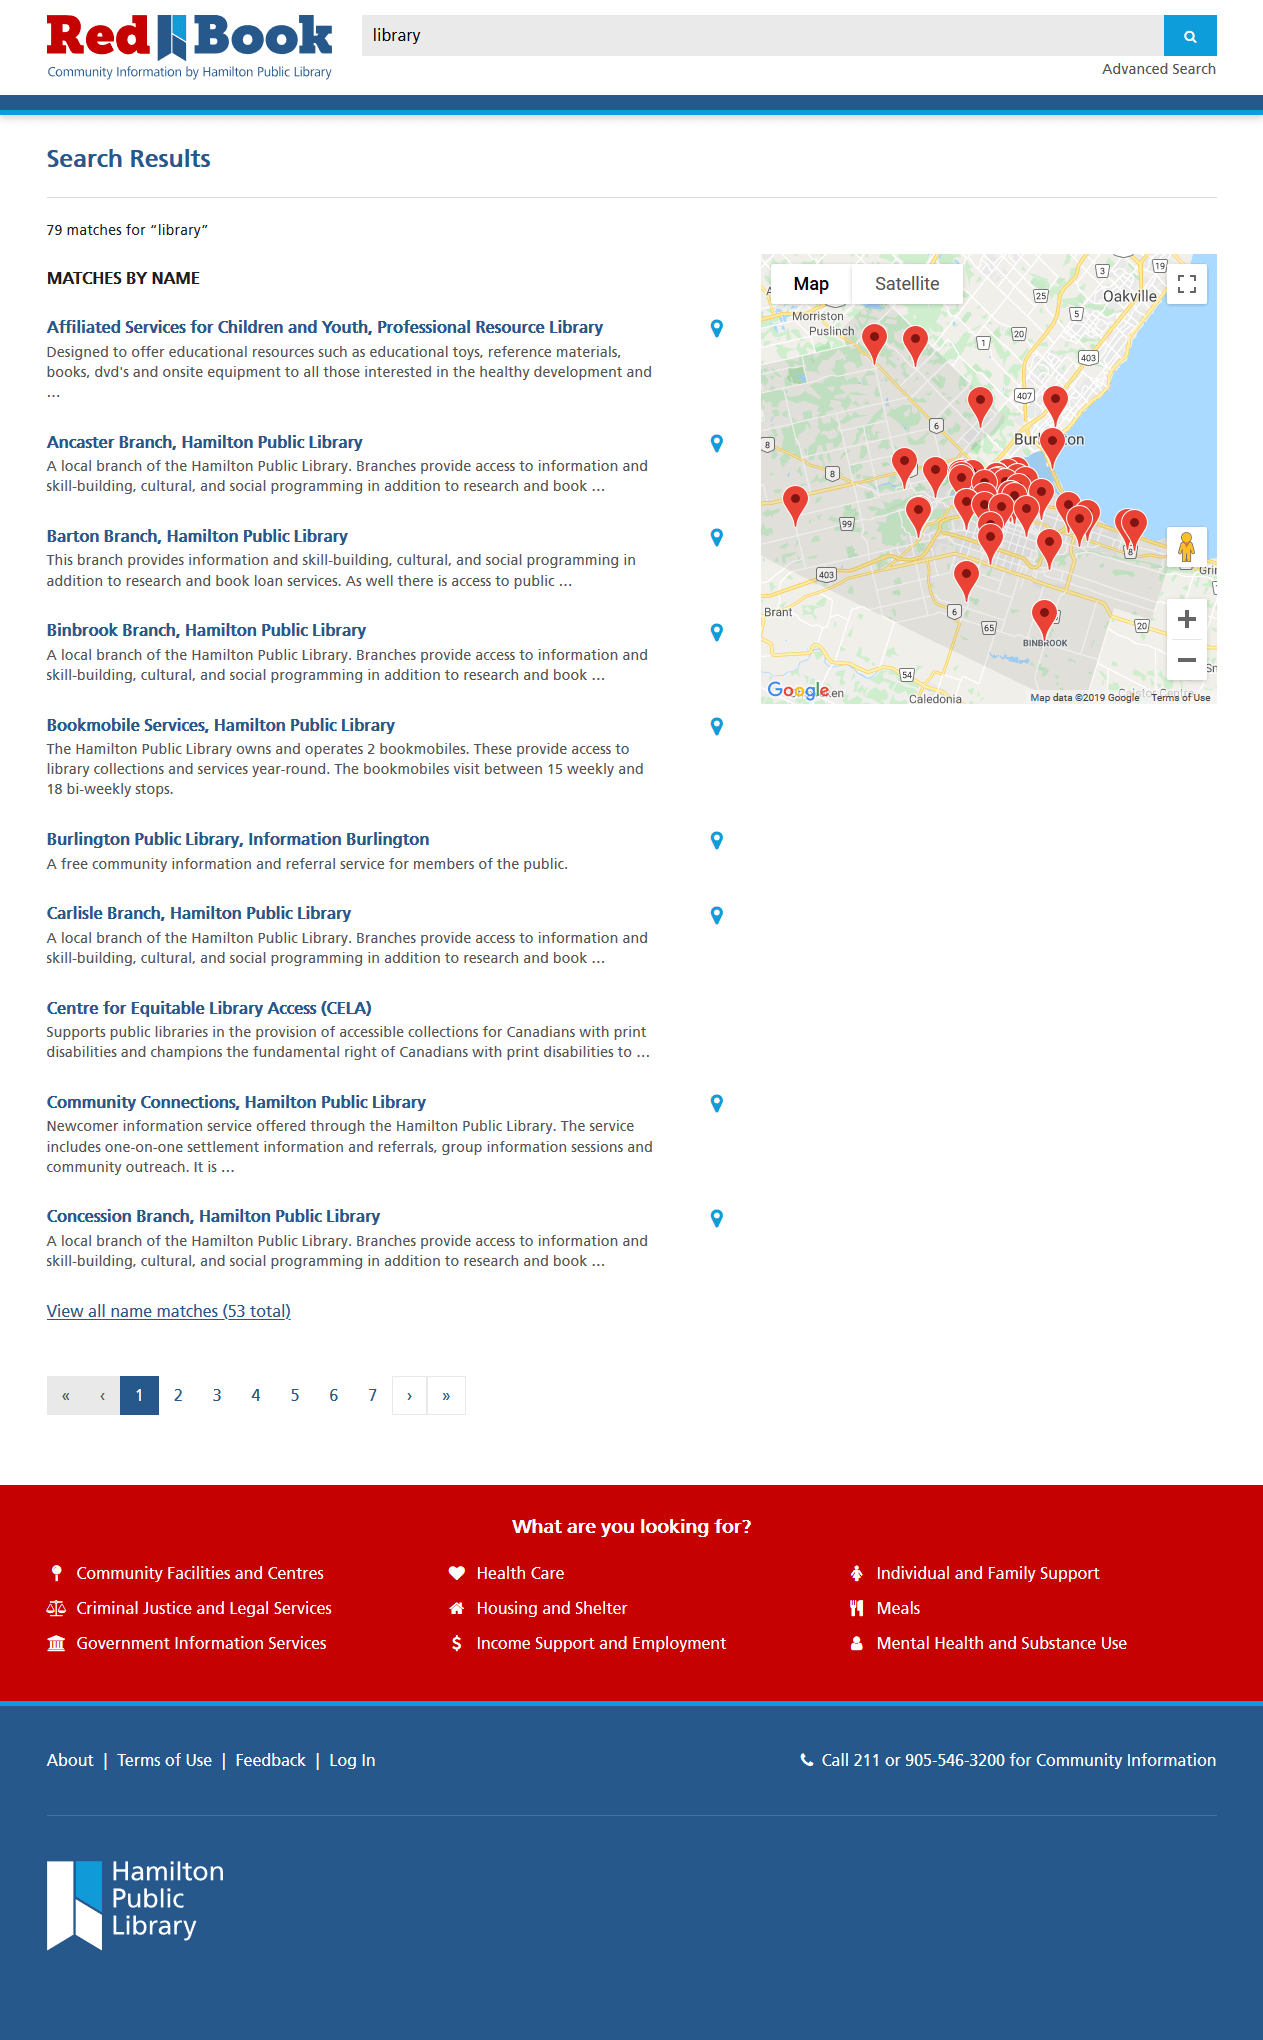 Search results page showing links, short descriptions, and a map with location pins